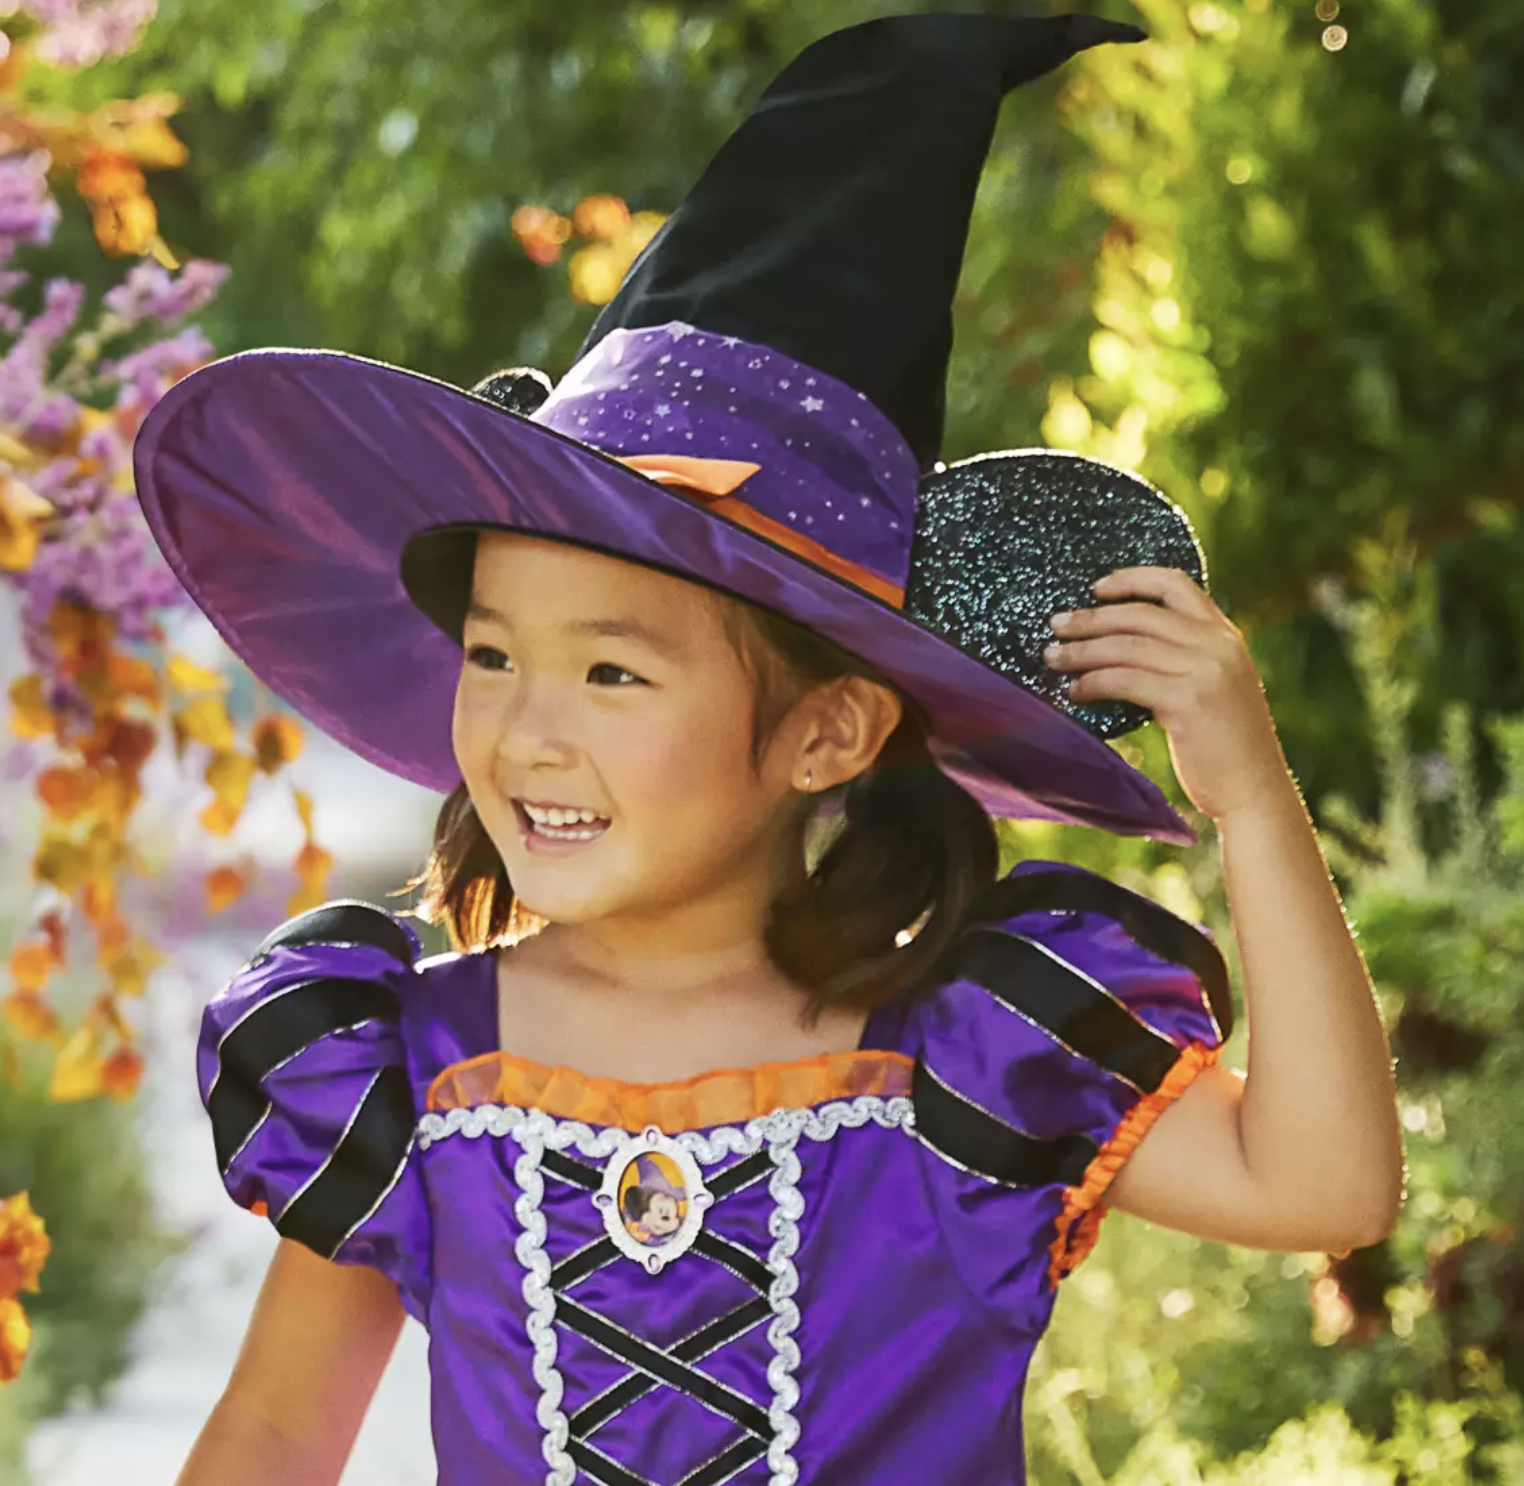 A child wearing a witch costume with a witch hat that has Minnie Mouse ears on the sides.